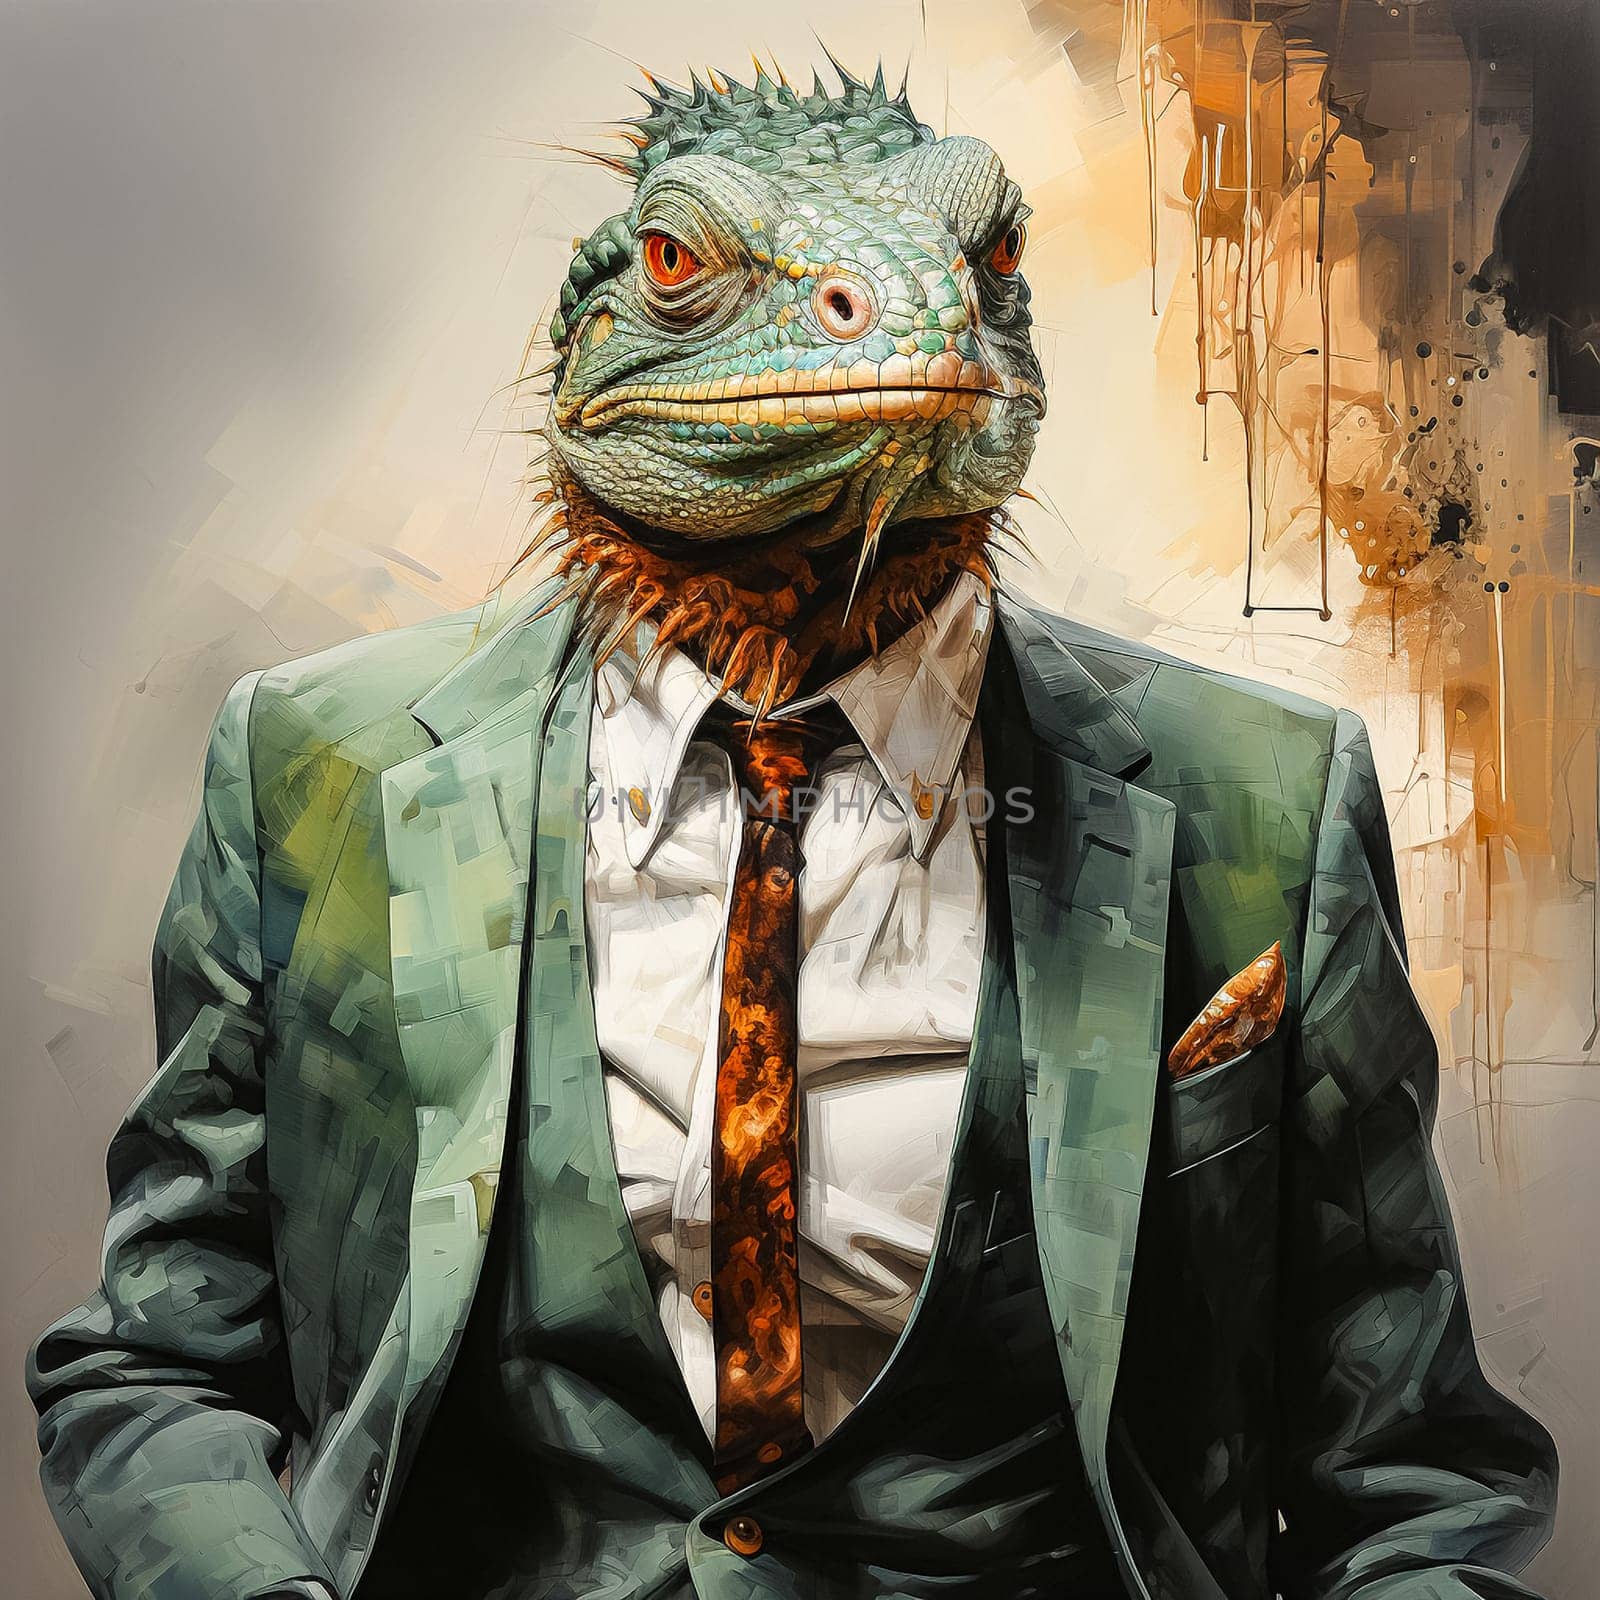 watercolor illustration of a lizard in a business suit, a unique and captivating image. High quality illustration